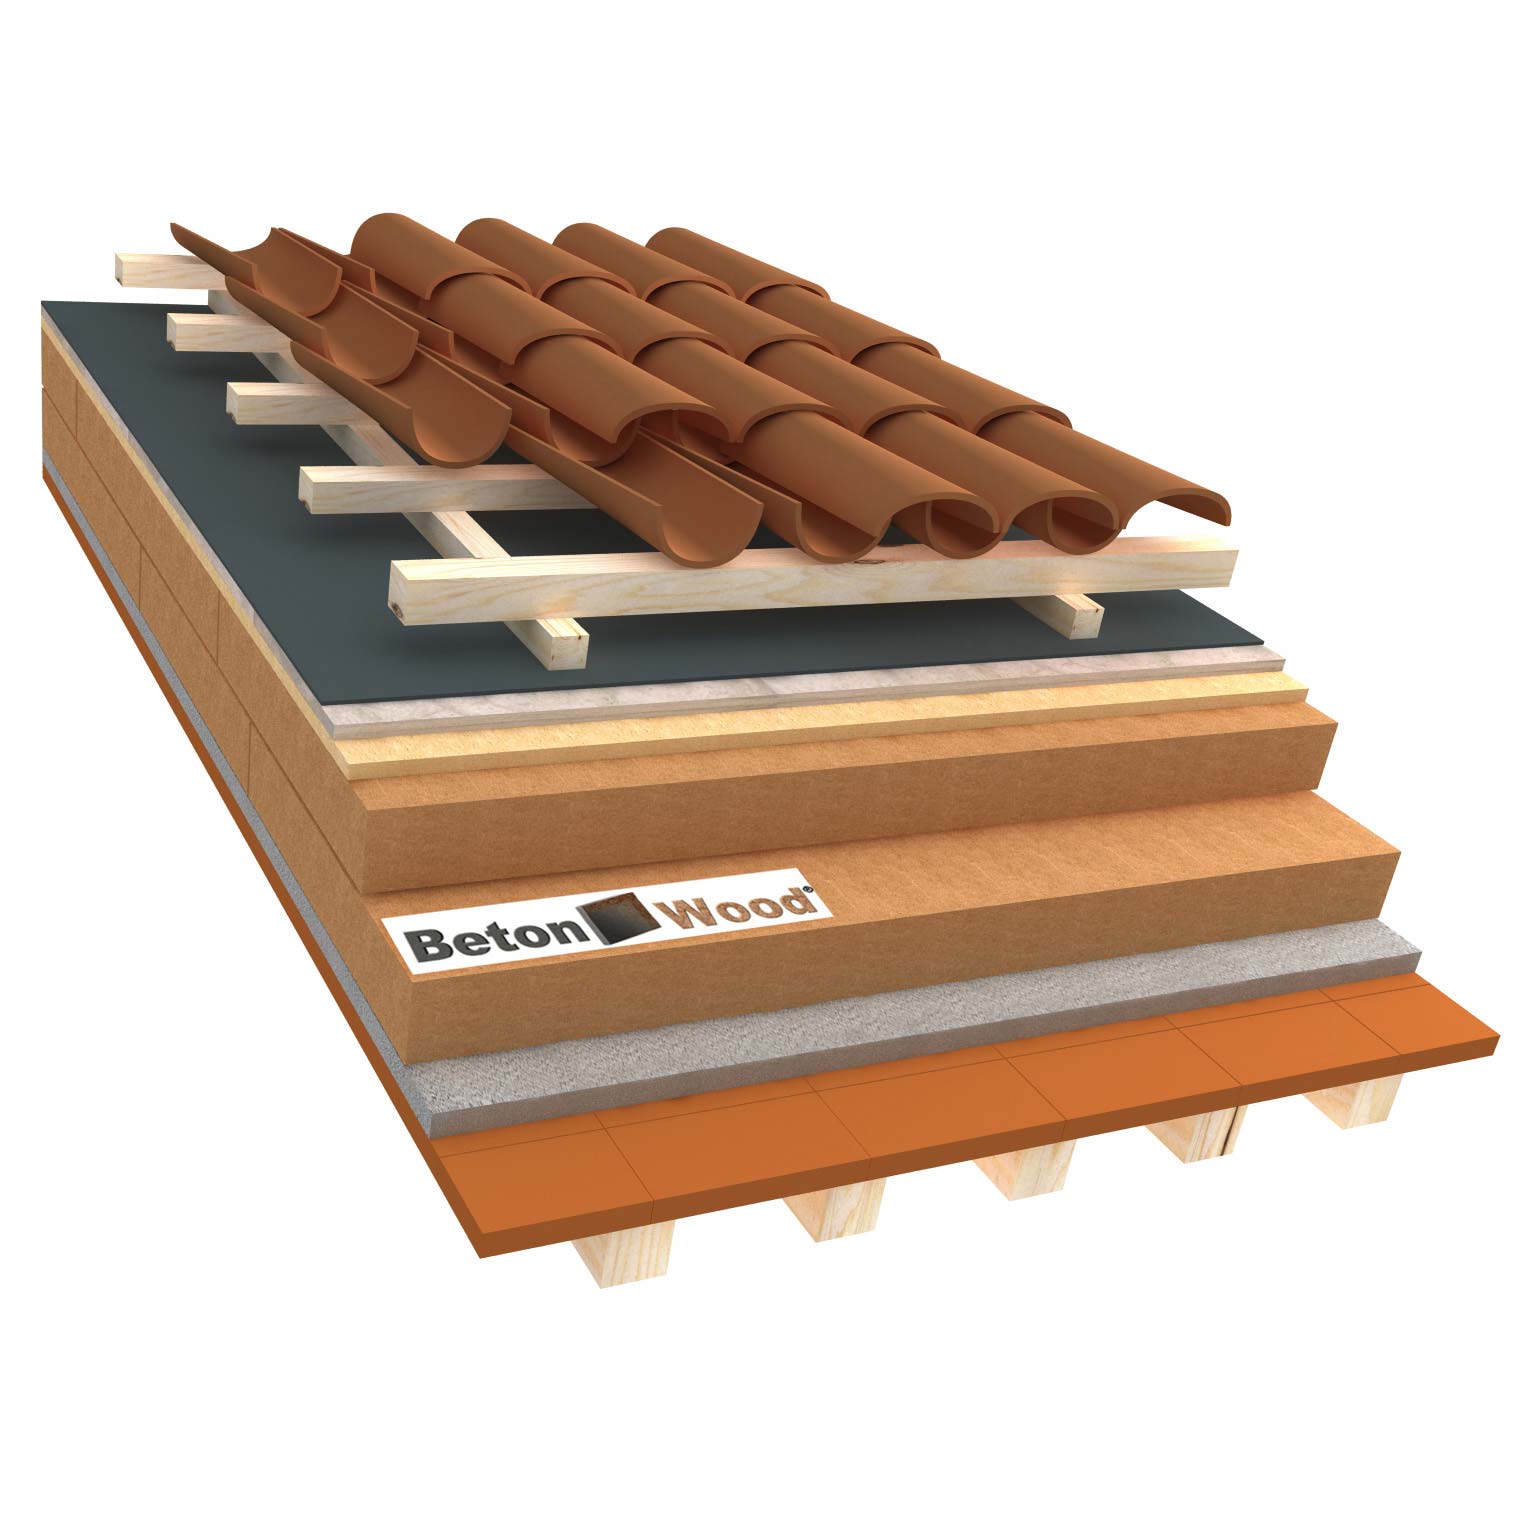 Ventilated roof with wood fiber Isorel, Special and cement bonded particle boards on terracotta tiles